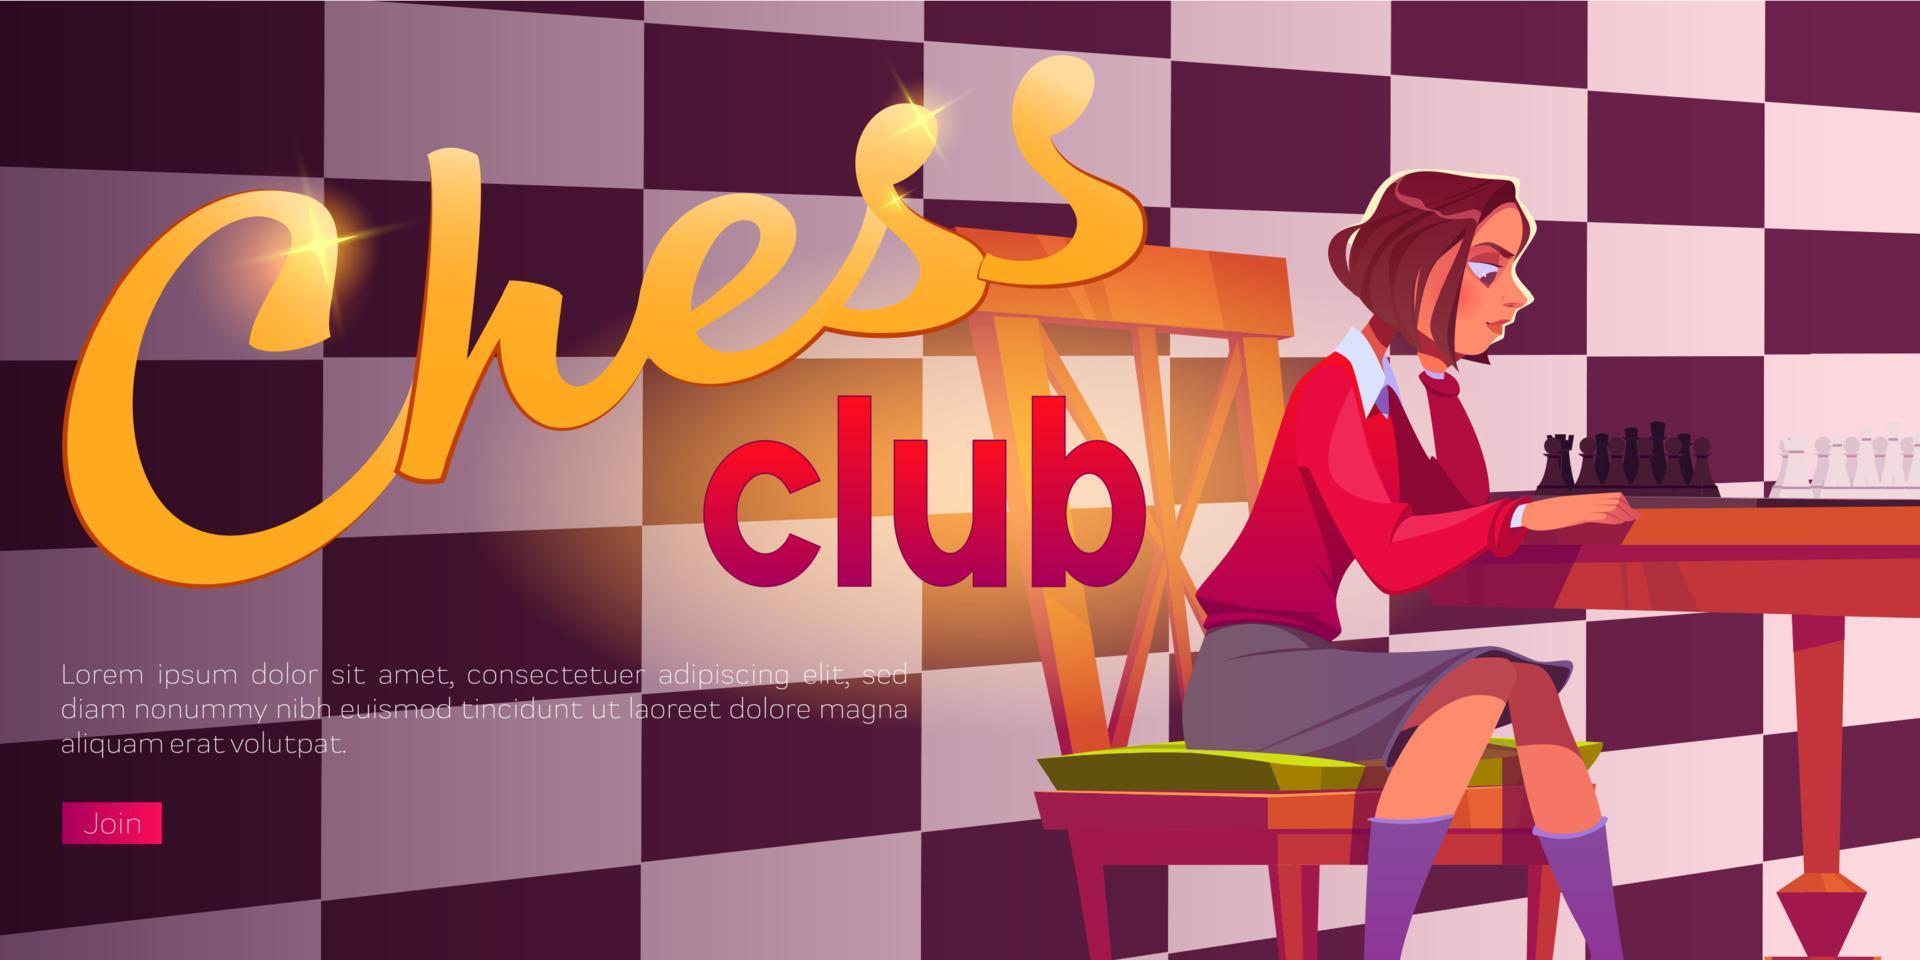 Chess club poster with girl playing chess vector